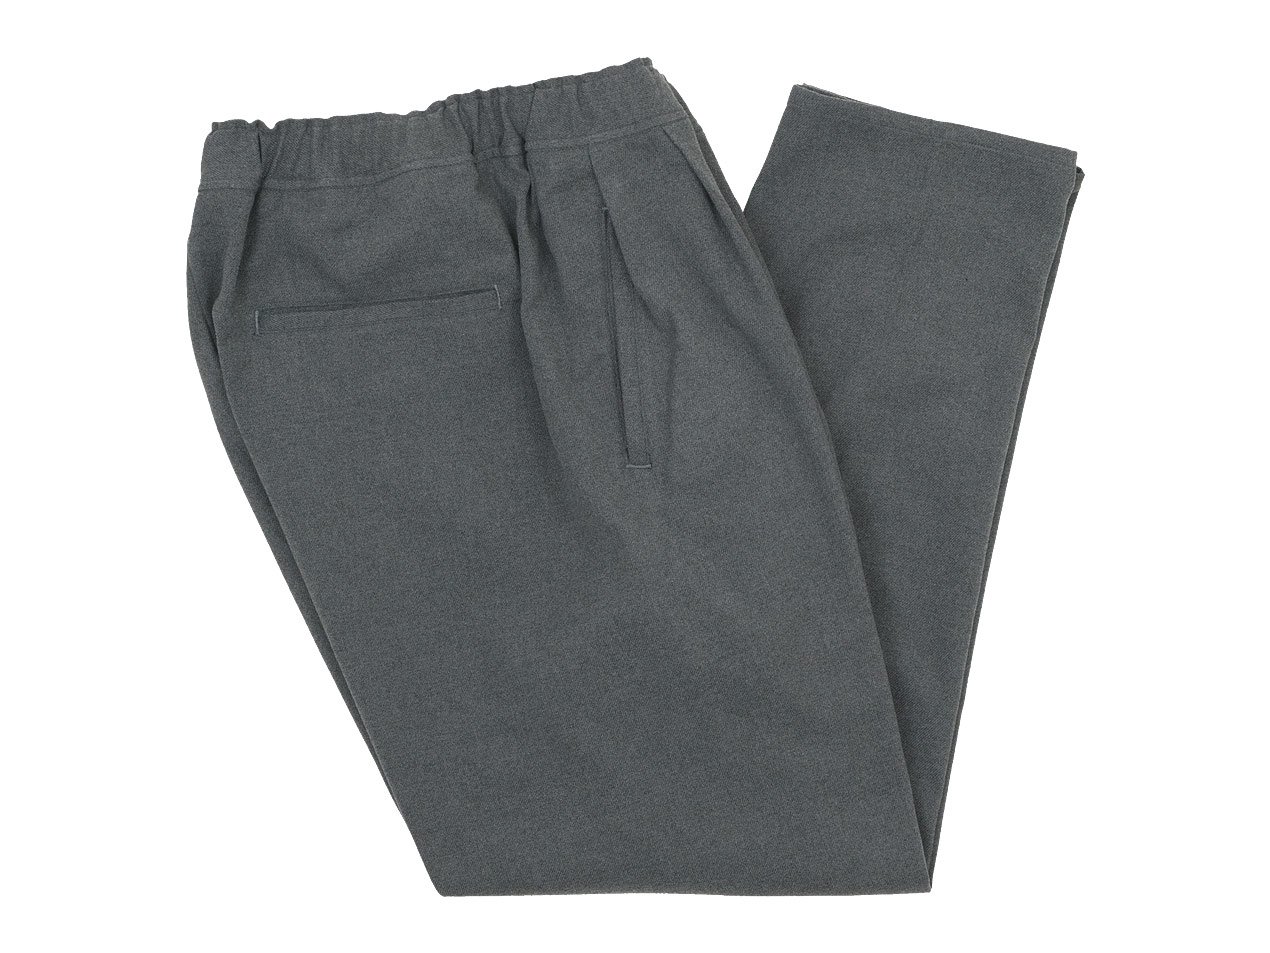 maillot mature washable serge easy trouser GRAY